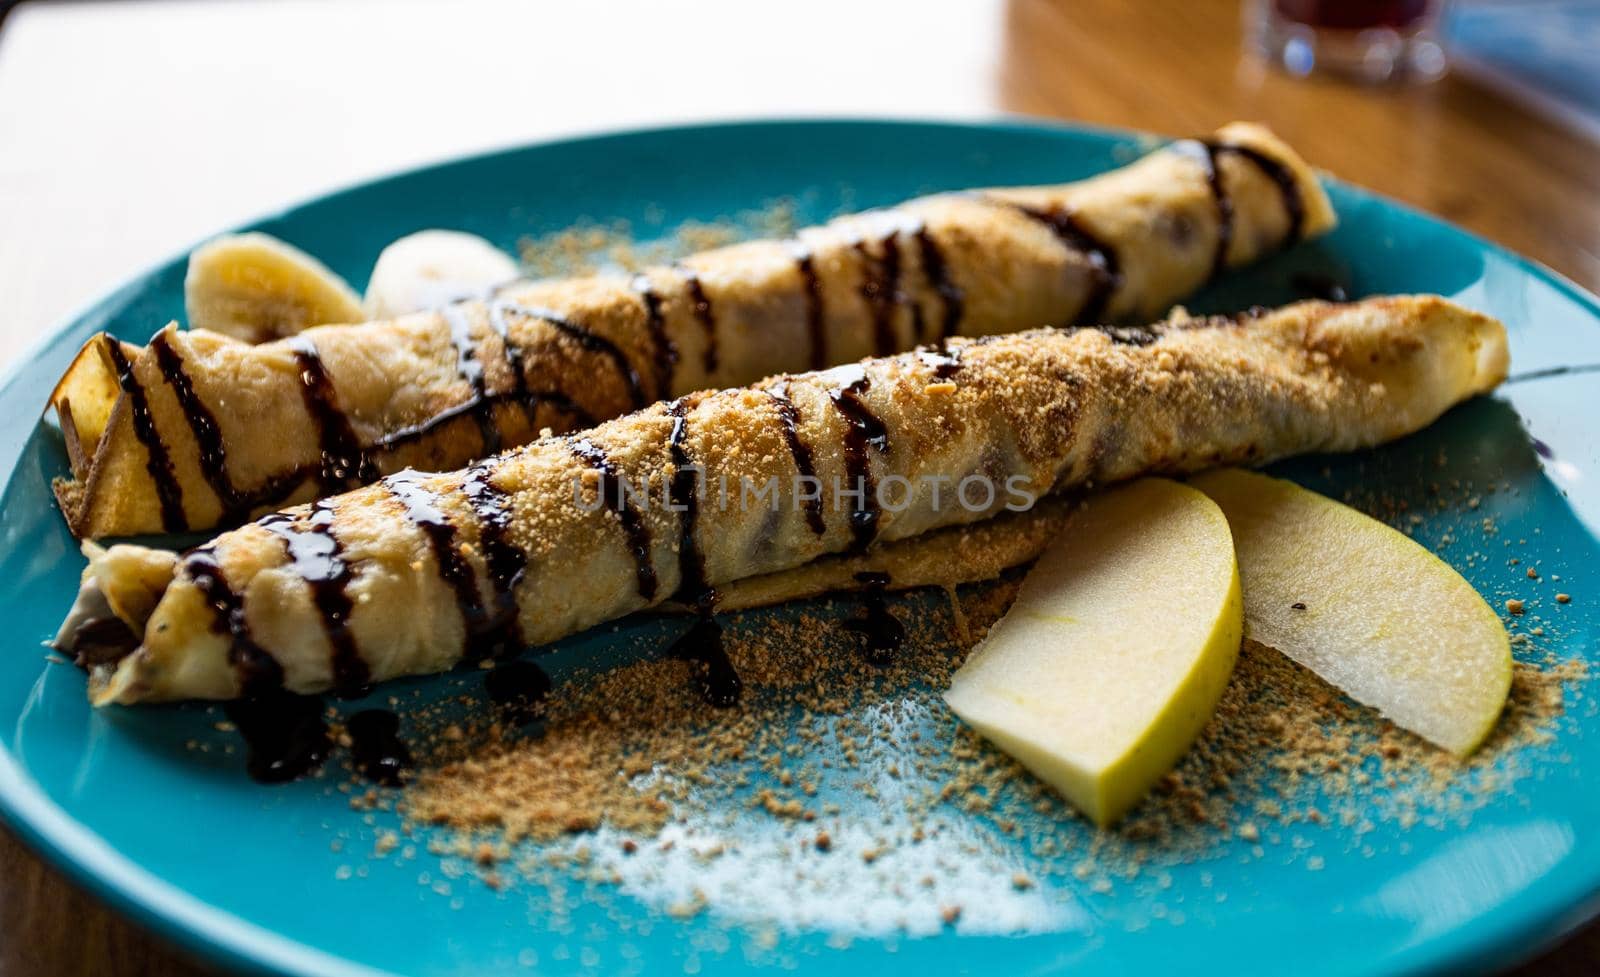 Arranged two crepe pancakes rolls on blue plate with apple and banana slices and chocolate topping. Dessert or sweets on table in restaurant